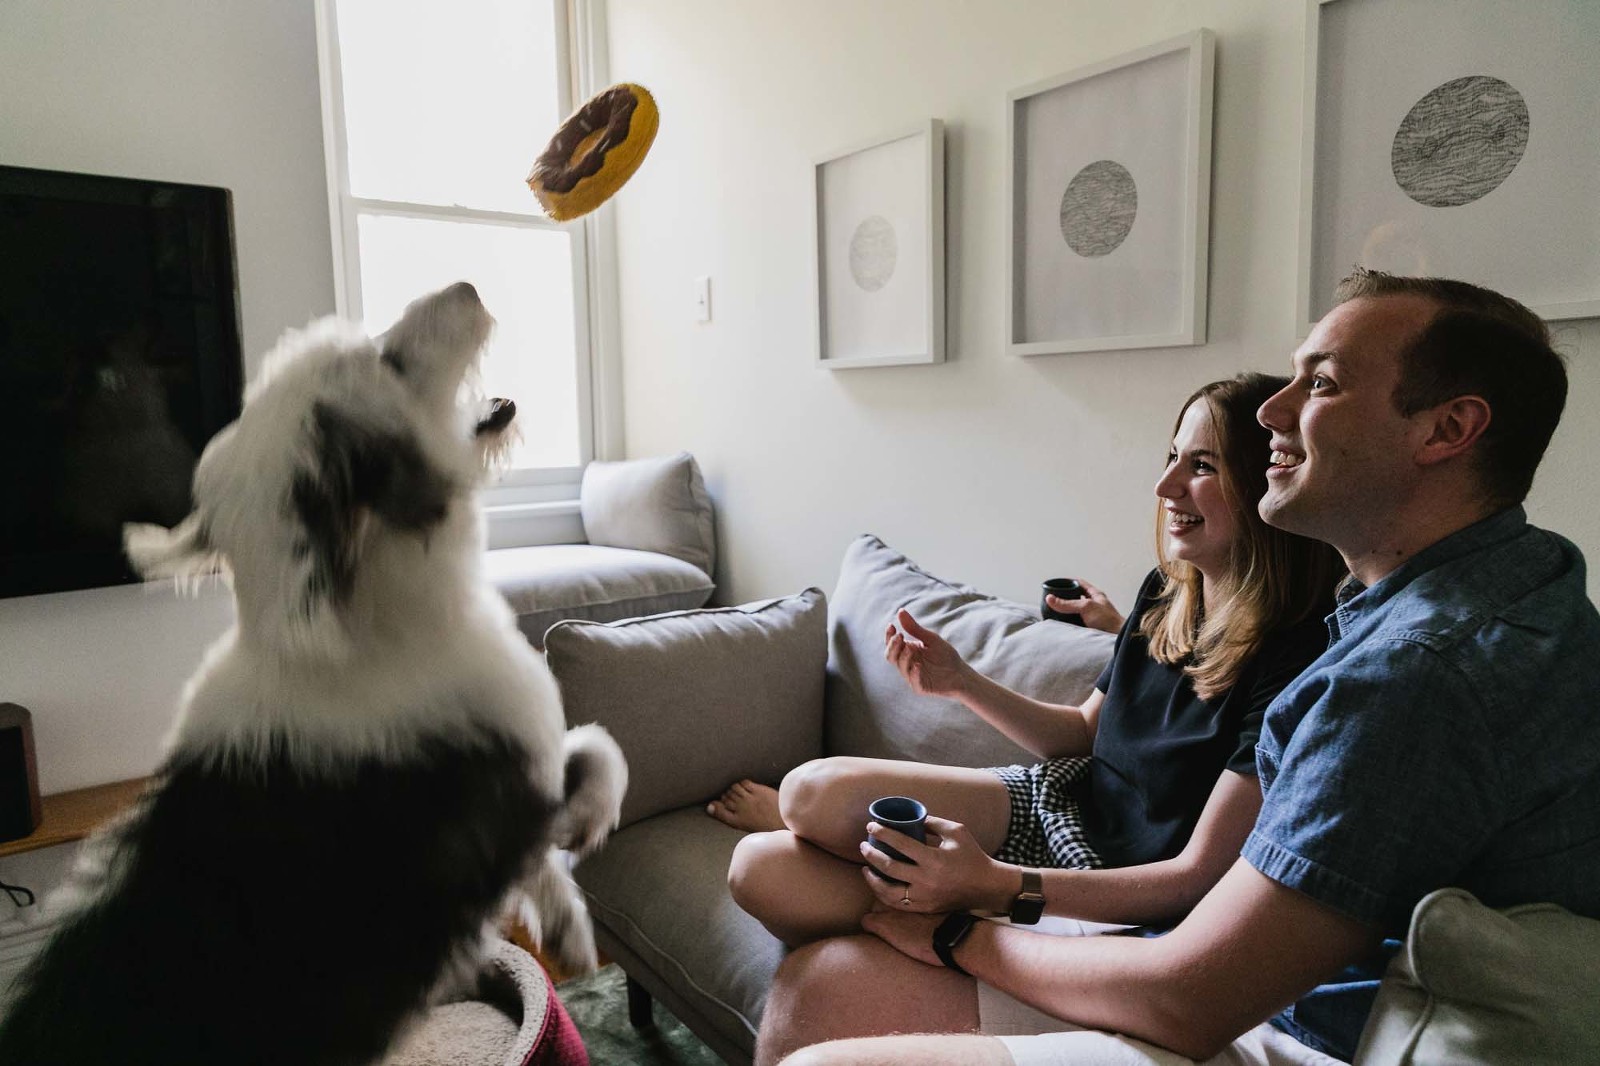 man and woman throw toy in the air to their sheepdog pet, from a living room sofa